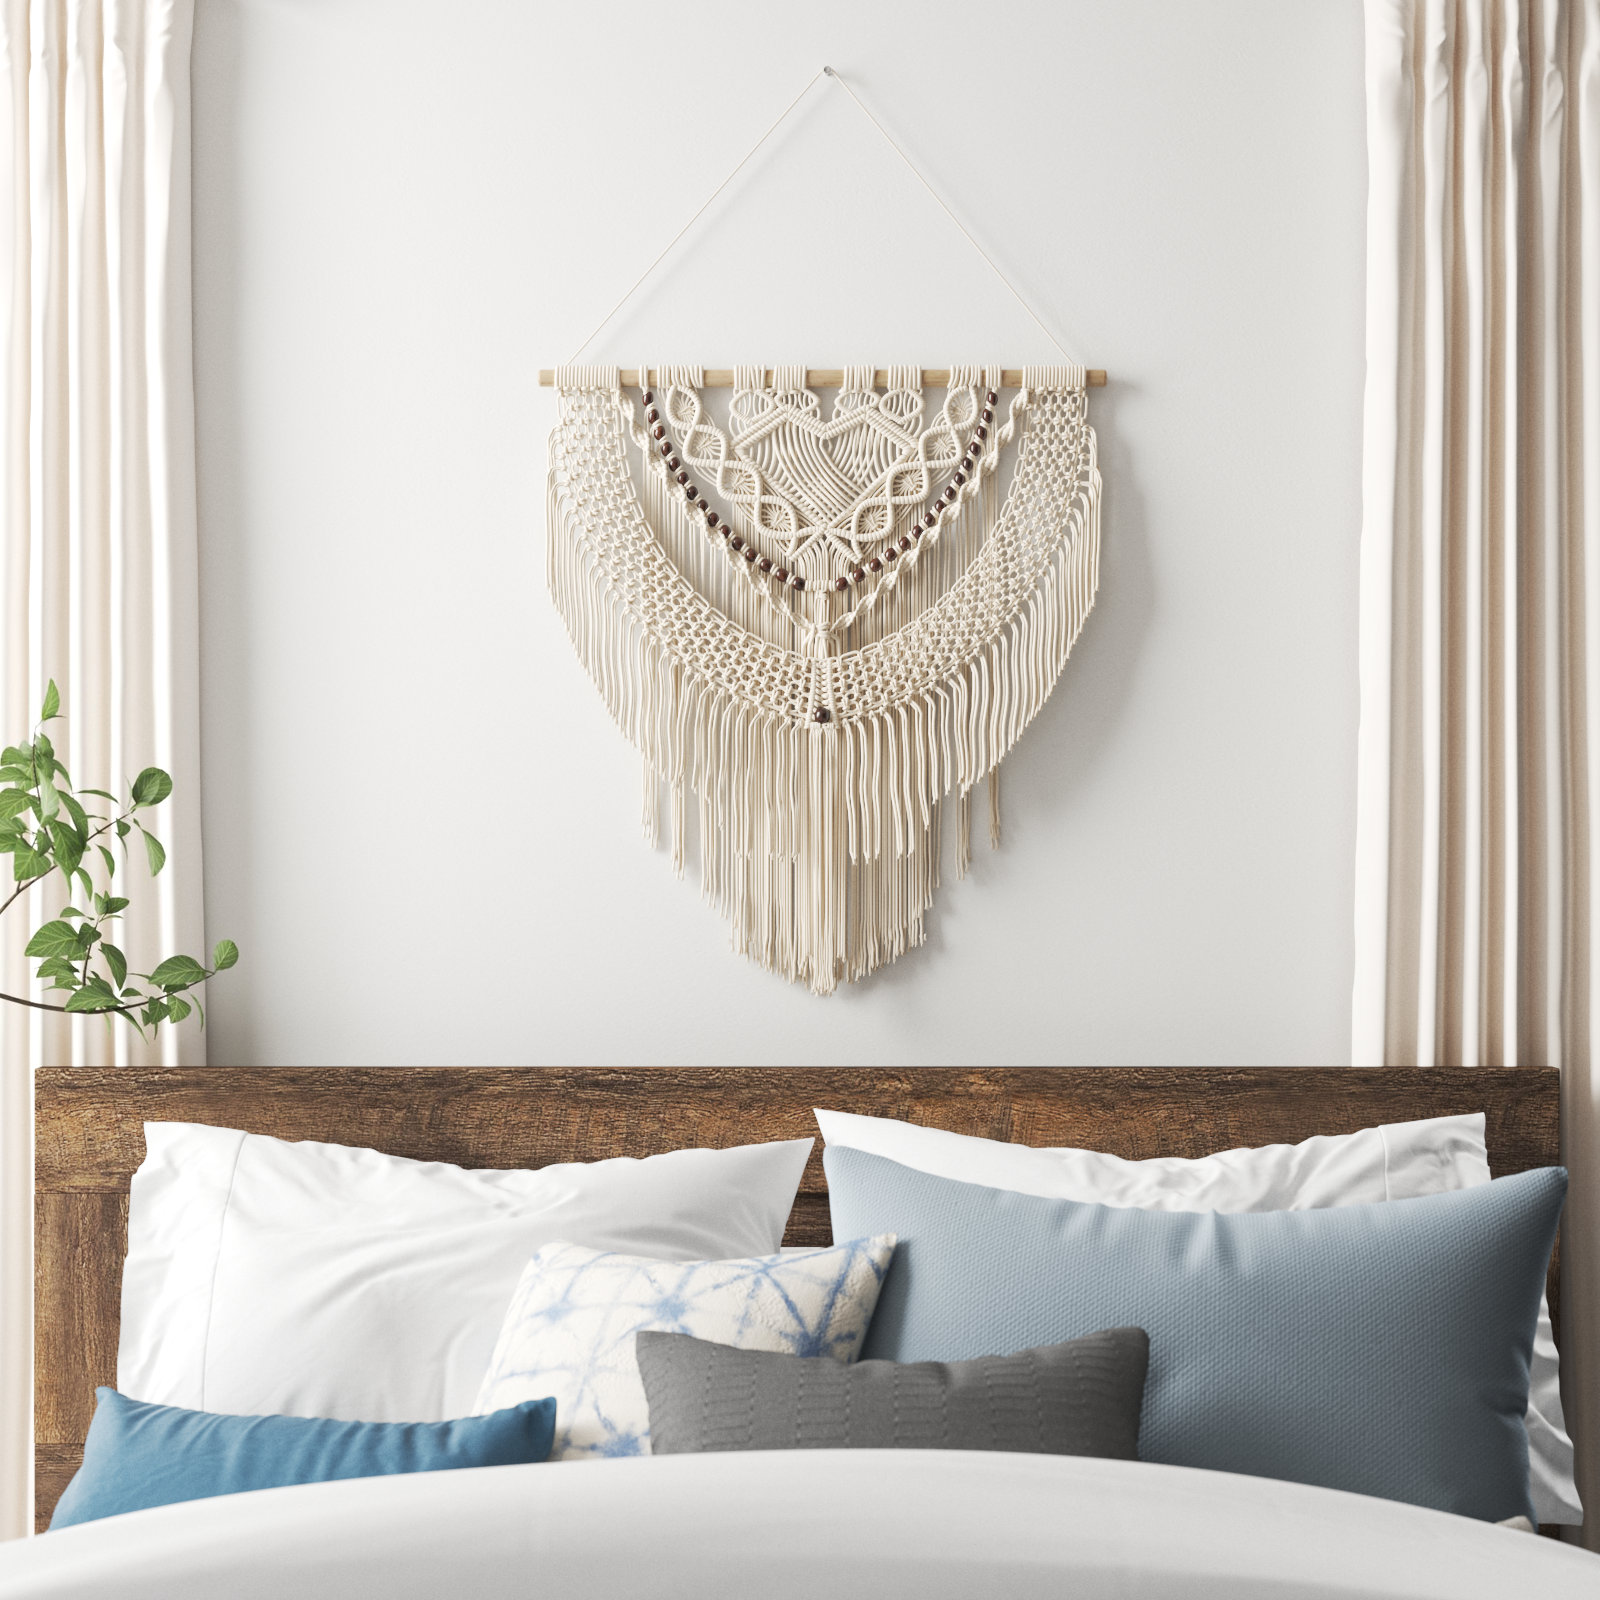 Blended Fabric Wall Hanging with Hanging Accessories Included Langley Street